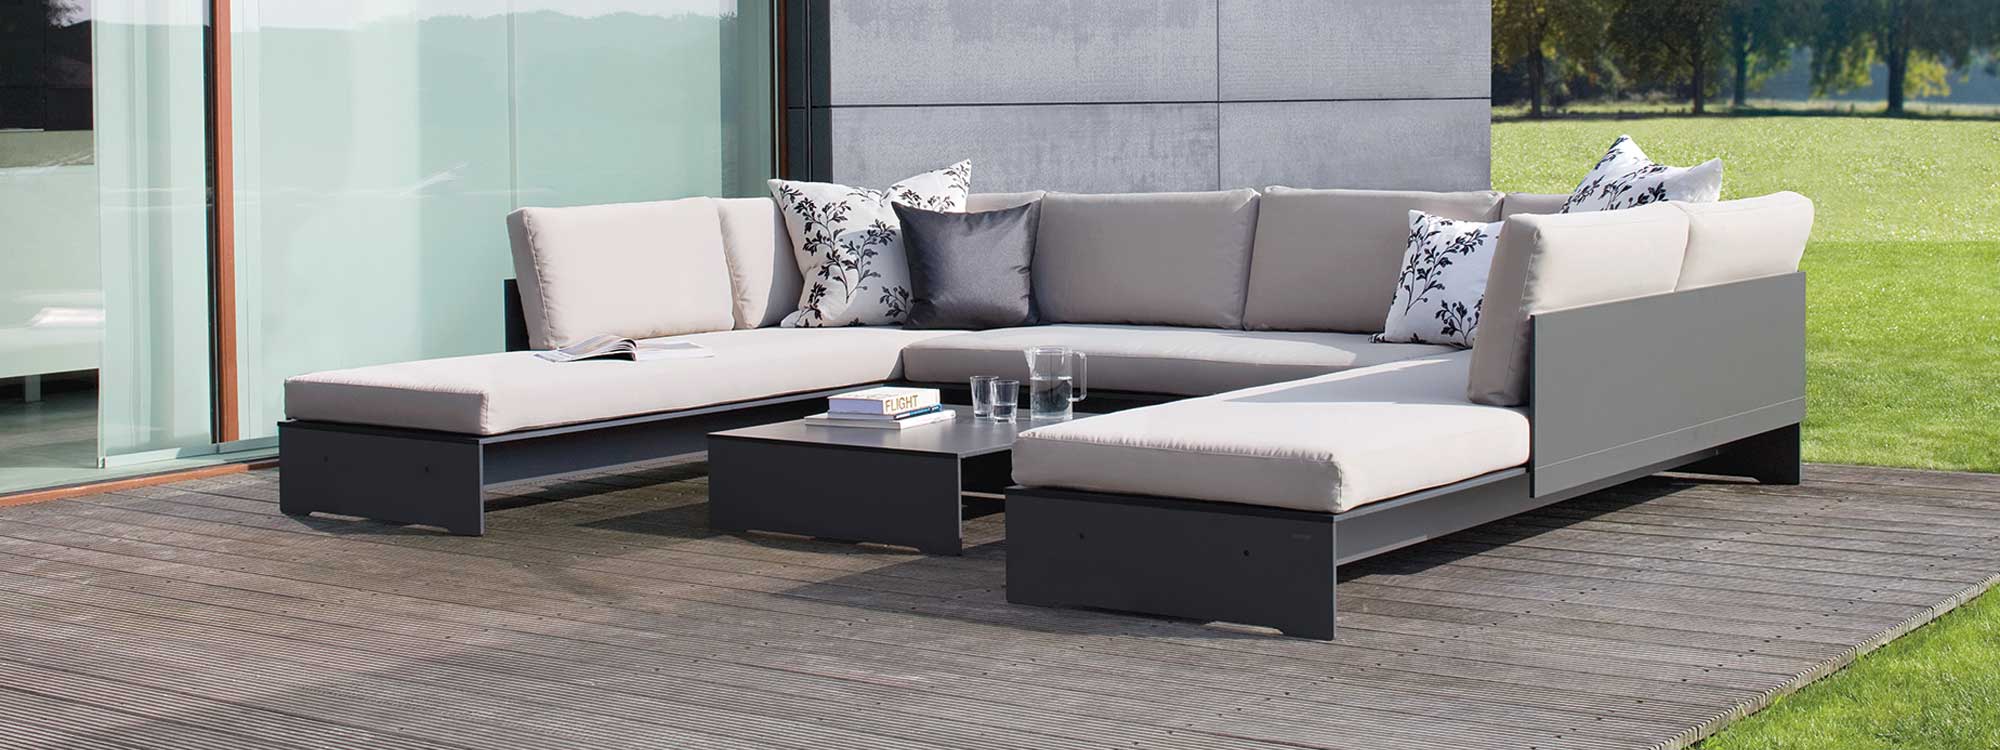 Image of Conmoto Riva U shaped garden sofa in anthracite coloured HPL and light-grey cushions